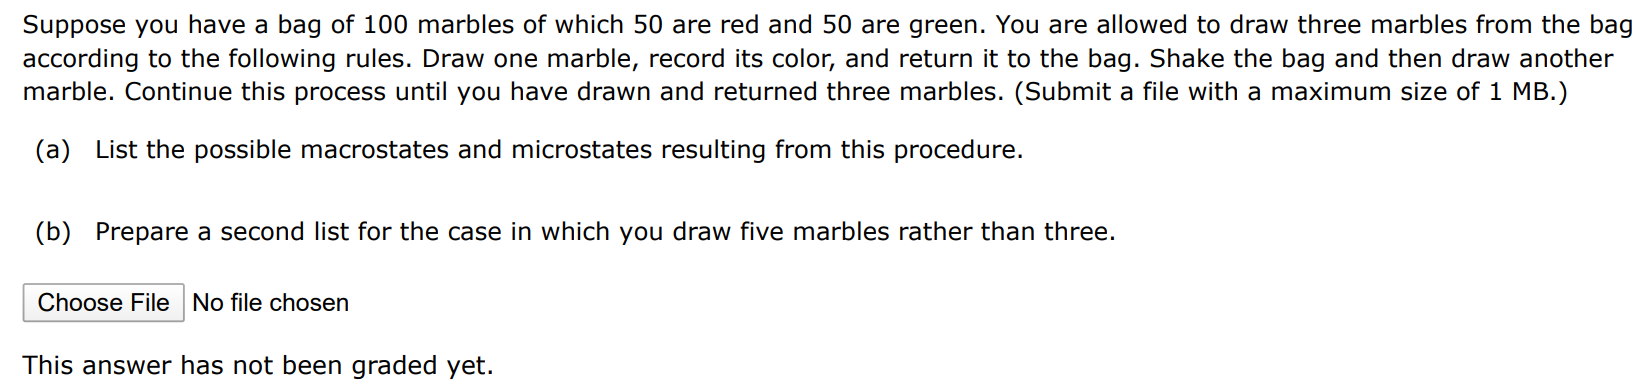 Suppose you have a bag of 100 marbles of which 50 are red and 50 are green. You are allowed to draw three marbles from the bag according to the following rules. Draw one marble, record its color, and return it to the bag. Shake the bag and then draw another marble. Continue this process until you have drawn and returned three marbles. (Submit a file with a maximum size of 1 MB. ) (a) List the possible macrostates and microstates resulting from this procedure. (b) Prepare a second list for the case in which you draw five marbles rather than three. Choose File No file chosen This answer has not been graded yet. 